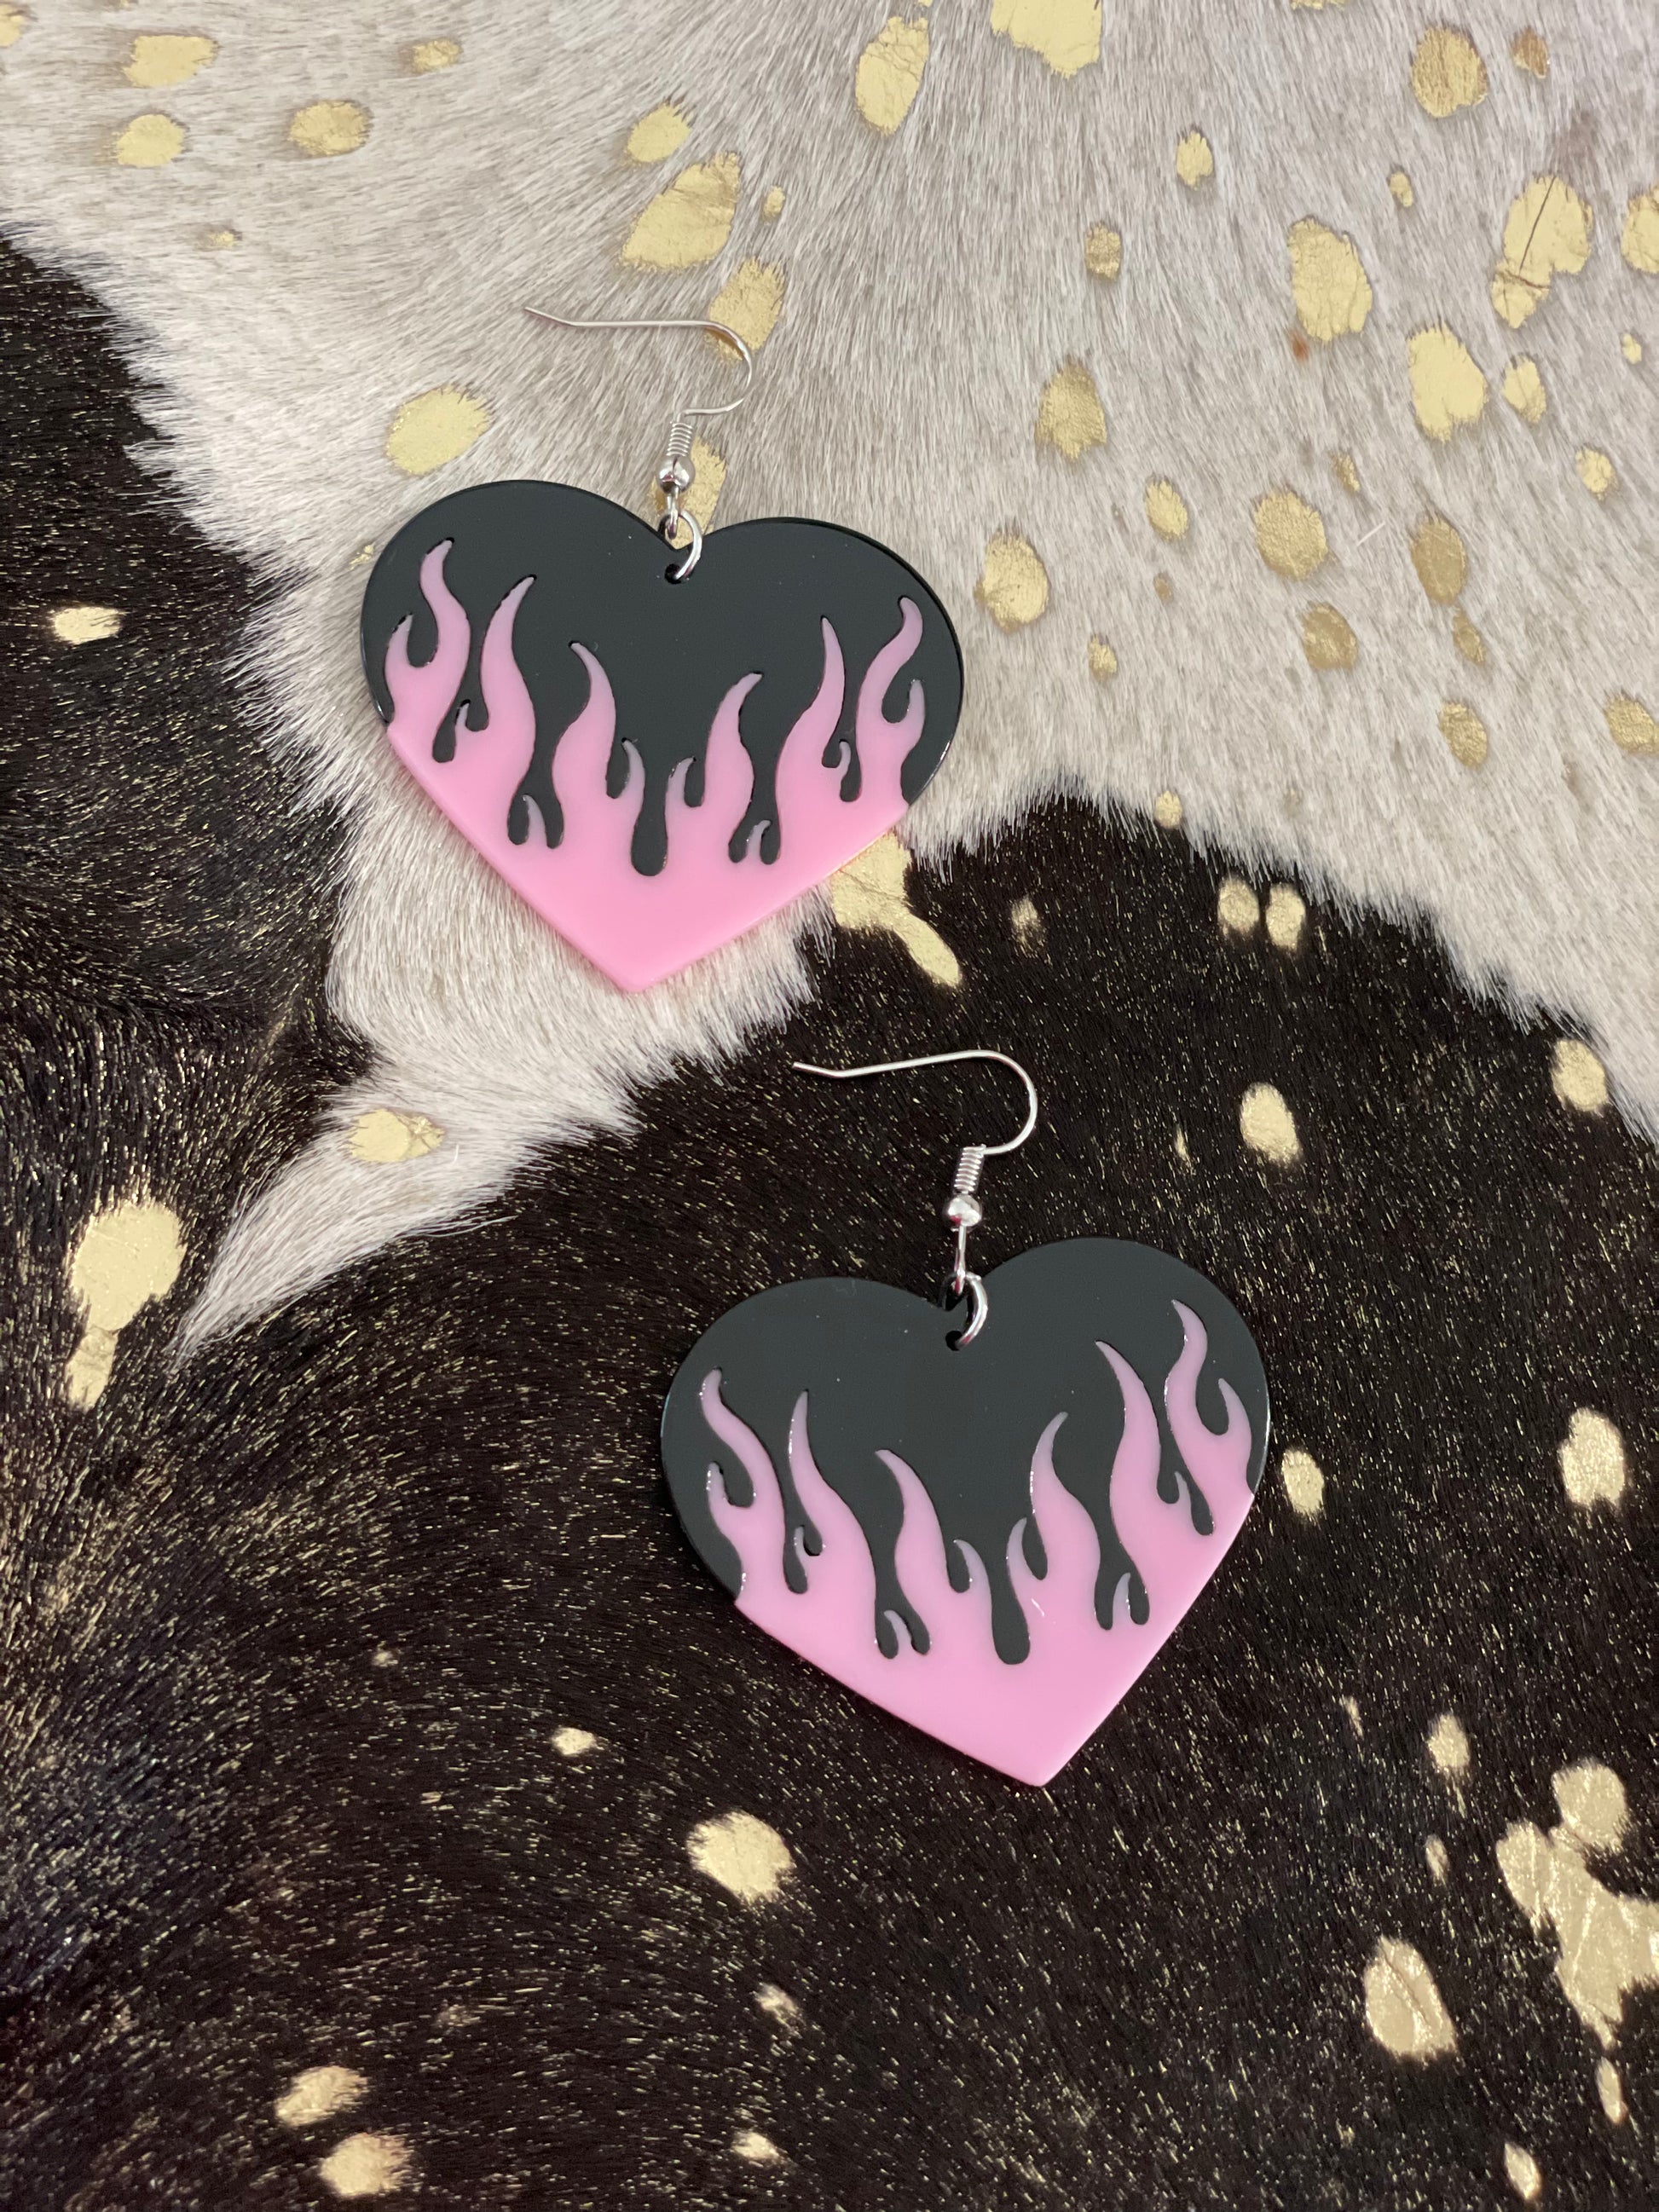 Big black dangly earrings with pink flames.